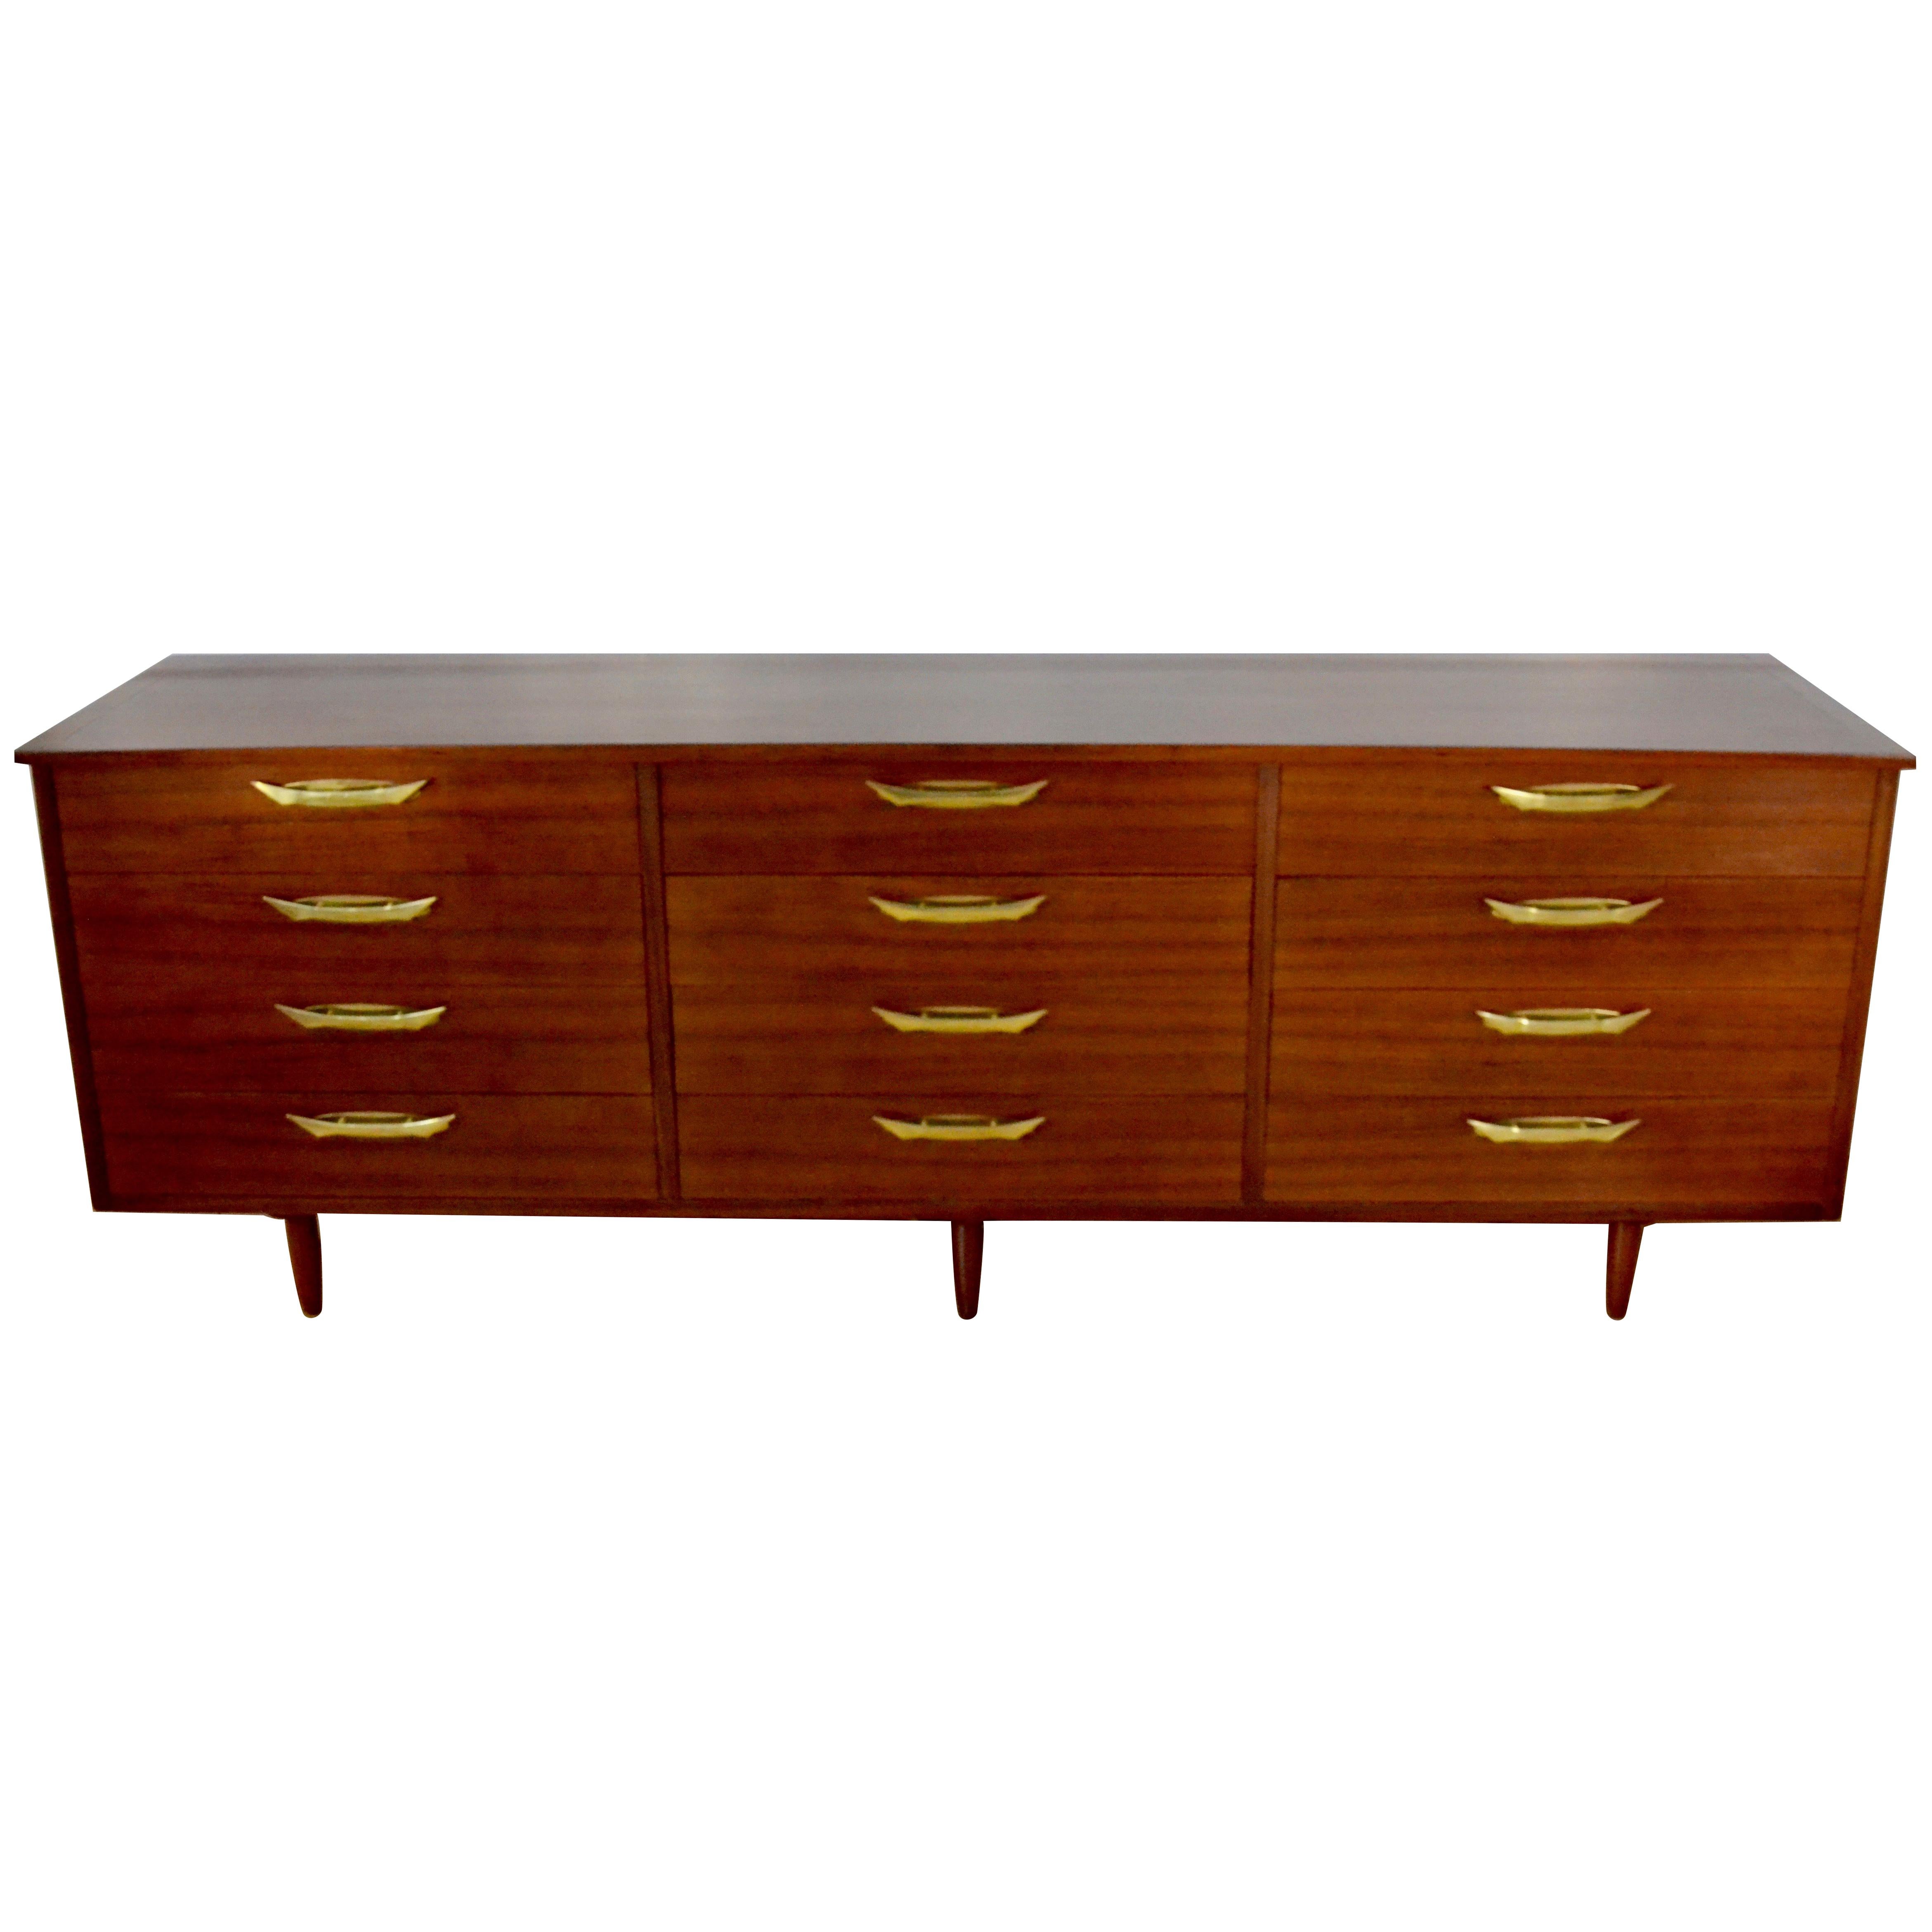  George Nakashima walnut 12-drawer dresser part of his Origins line manufactured by Widdicomb dated 1960. 
The dresser case is American walnut with Bay Laurel drawers and polished bronze drawer pulls..
The top is a graceful overhang running the